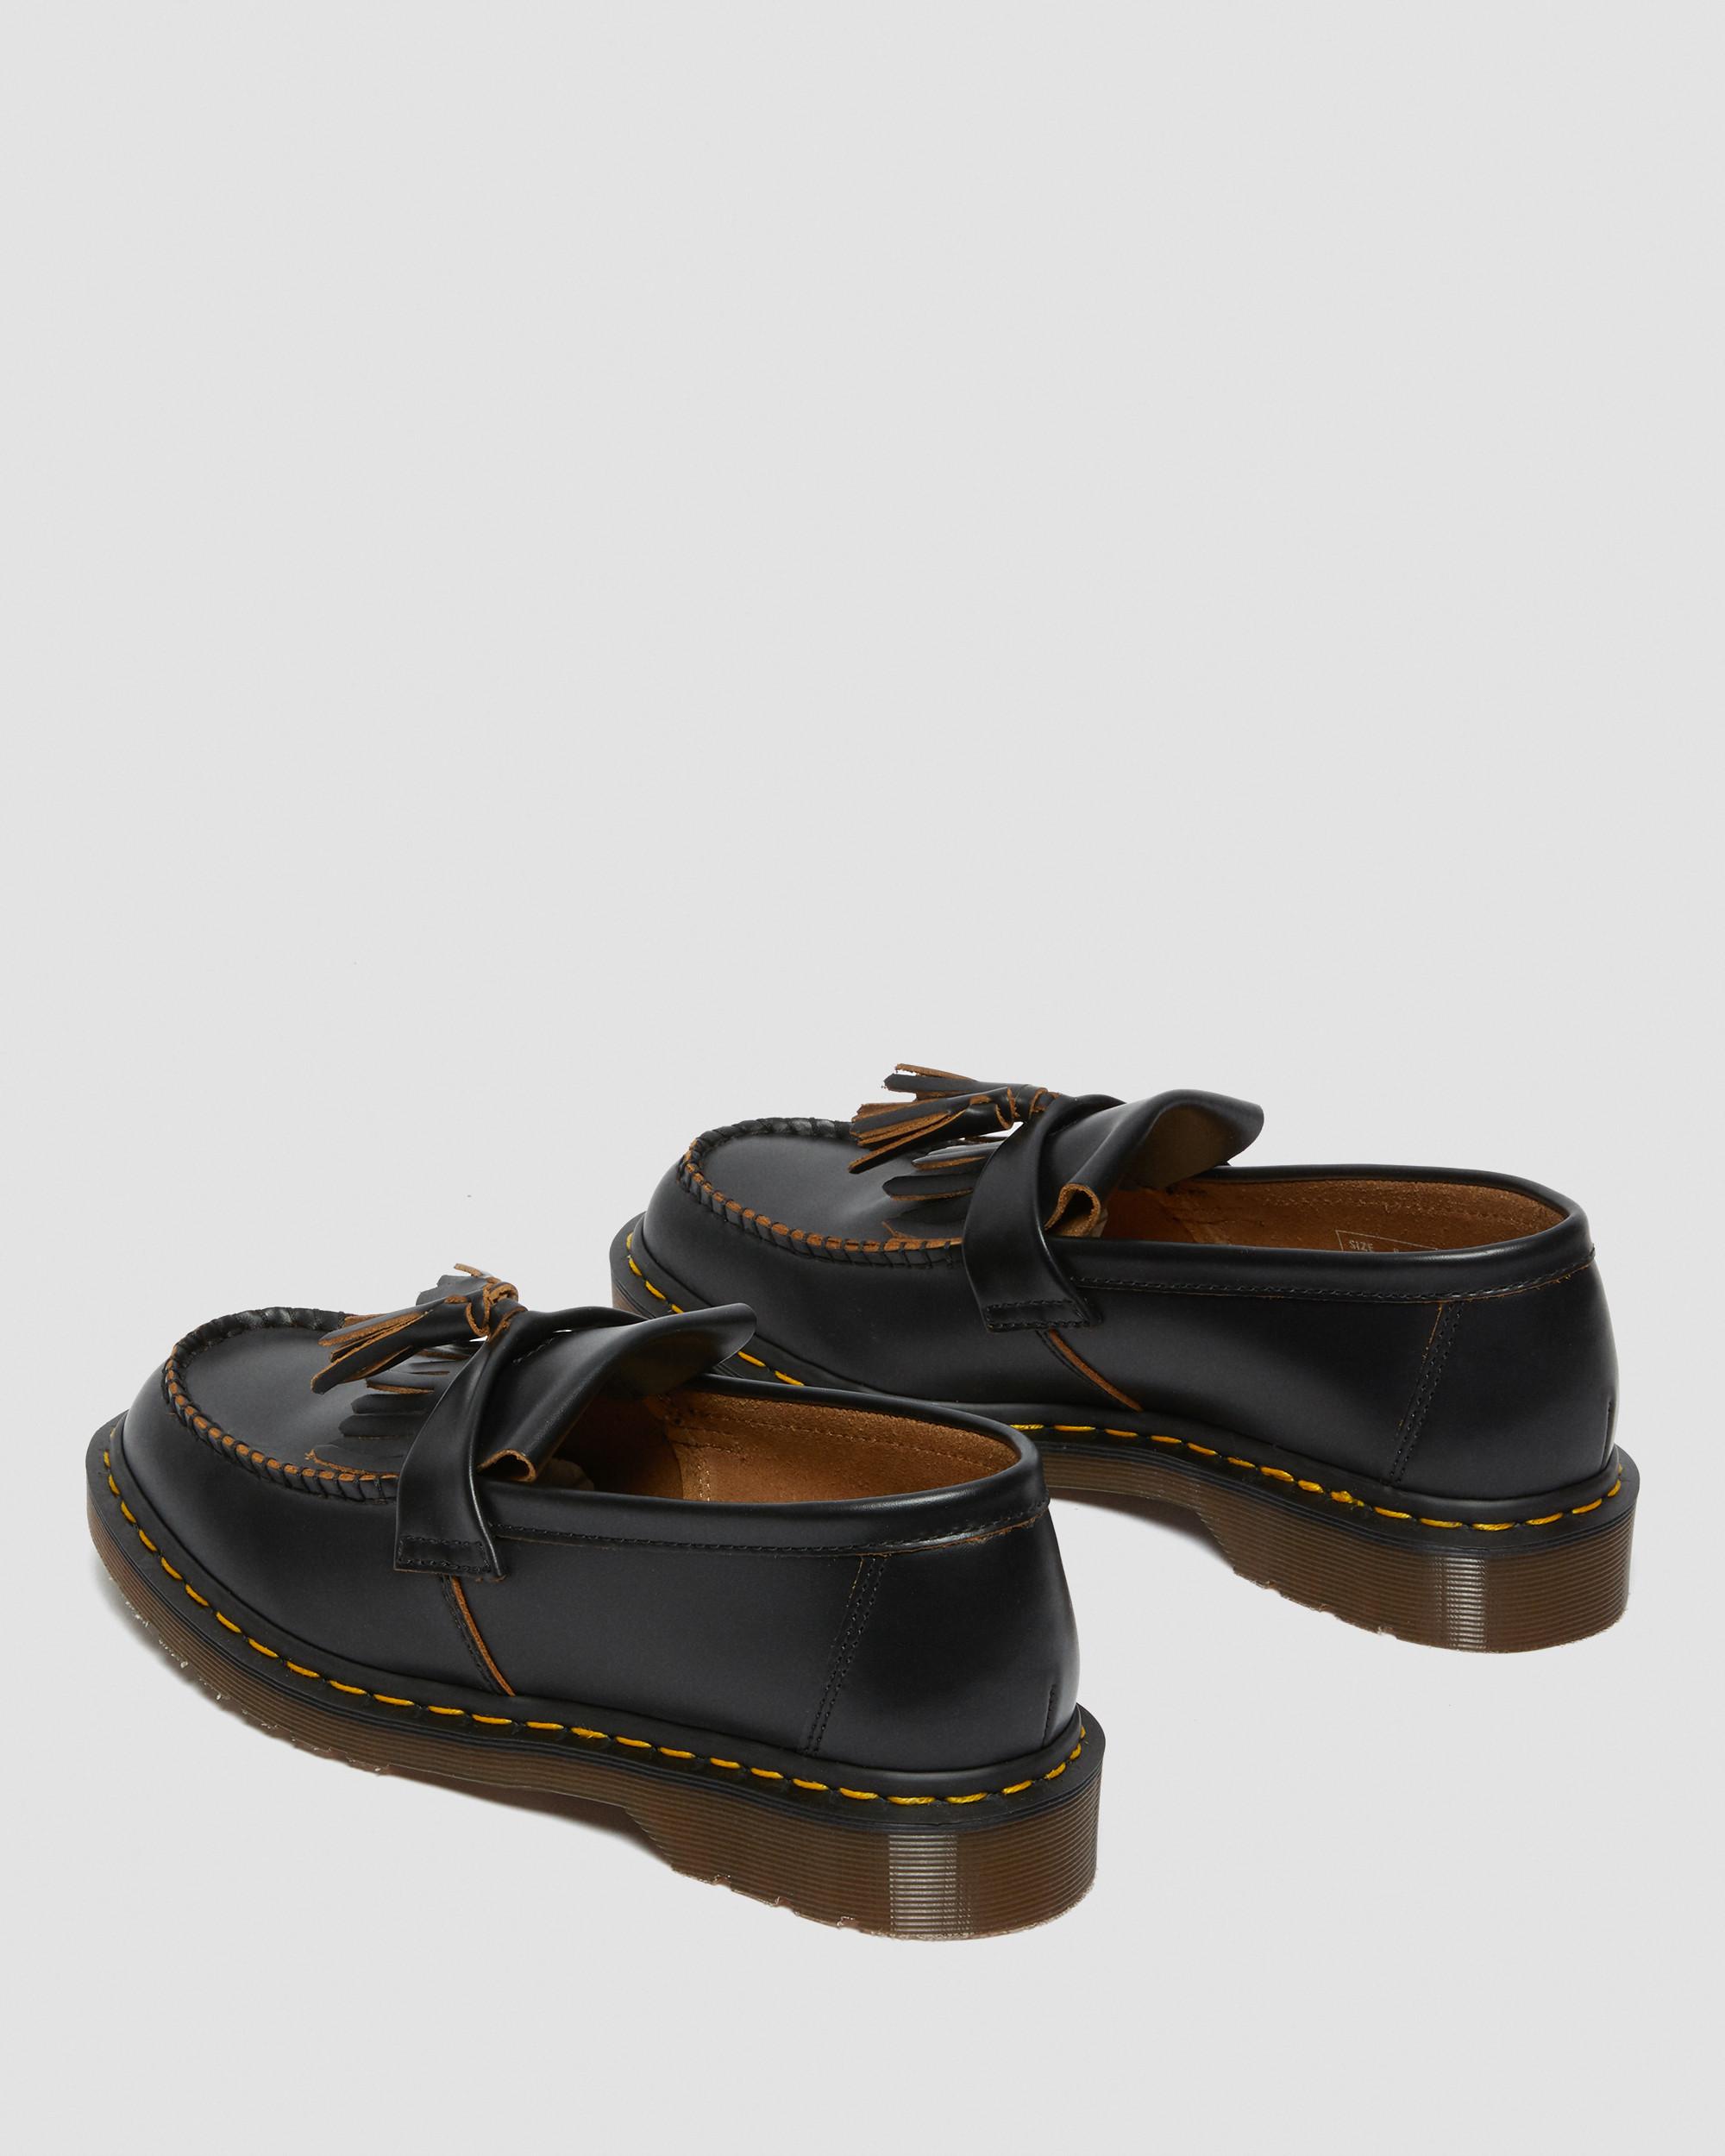 Adrian Made in England Quilon Leather Tassel Loafers in Black | Dr. Martens